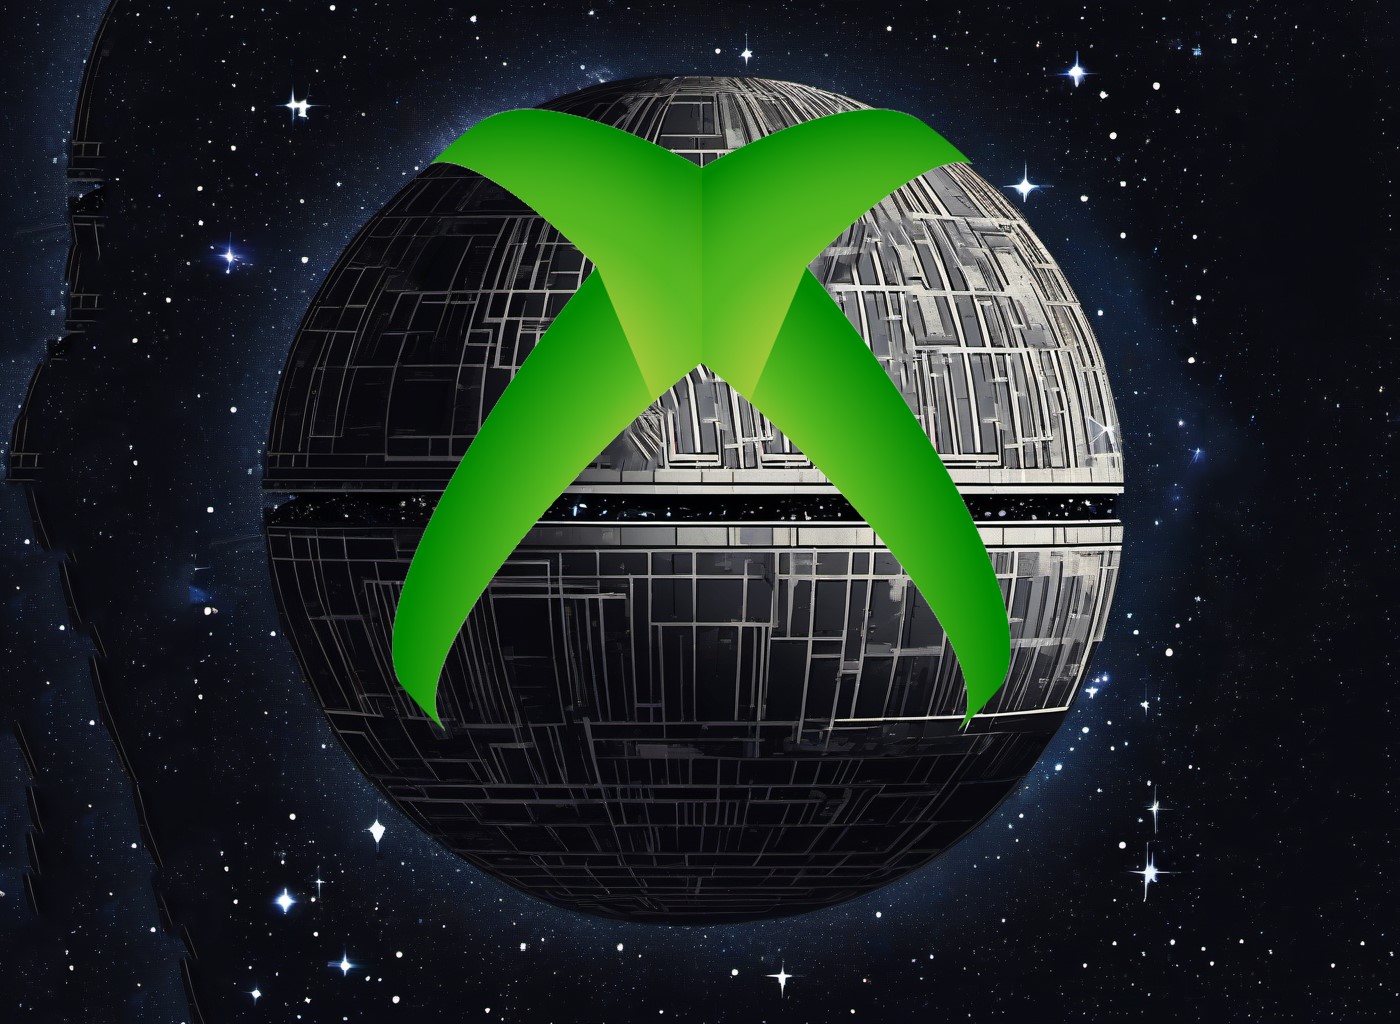 Could Xbox Exit Gaming In 2027? Alleged Phil Spencer Comments